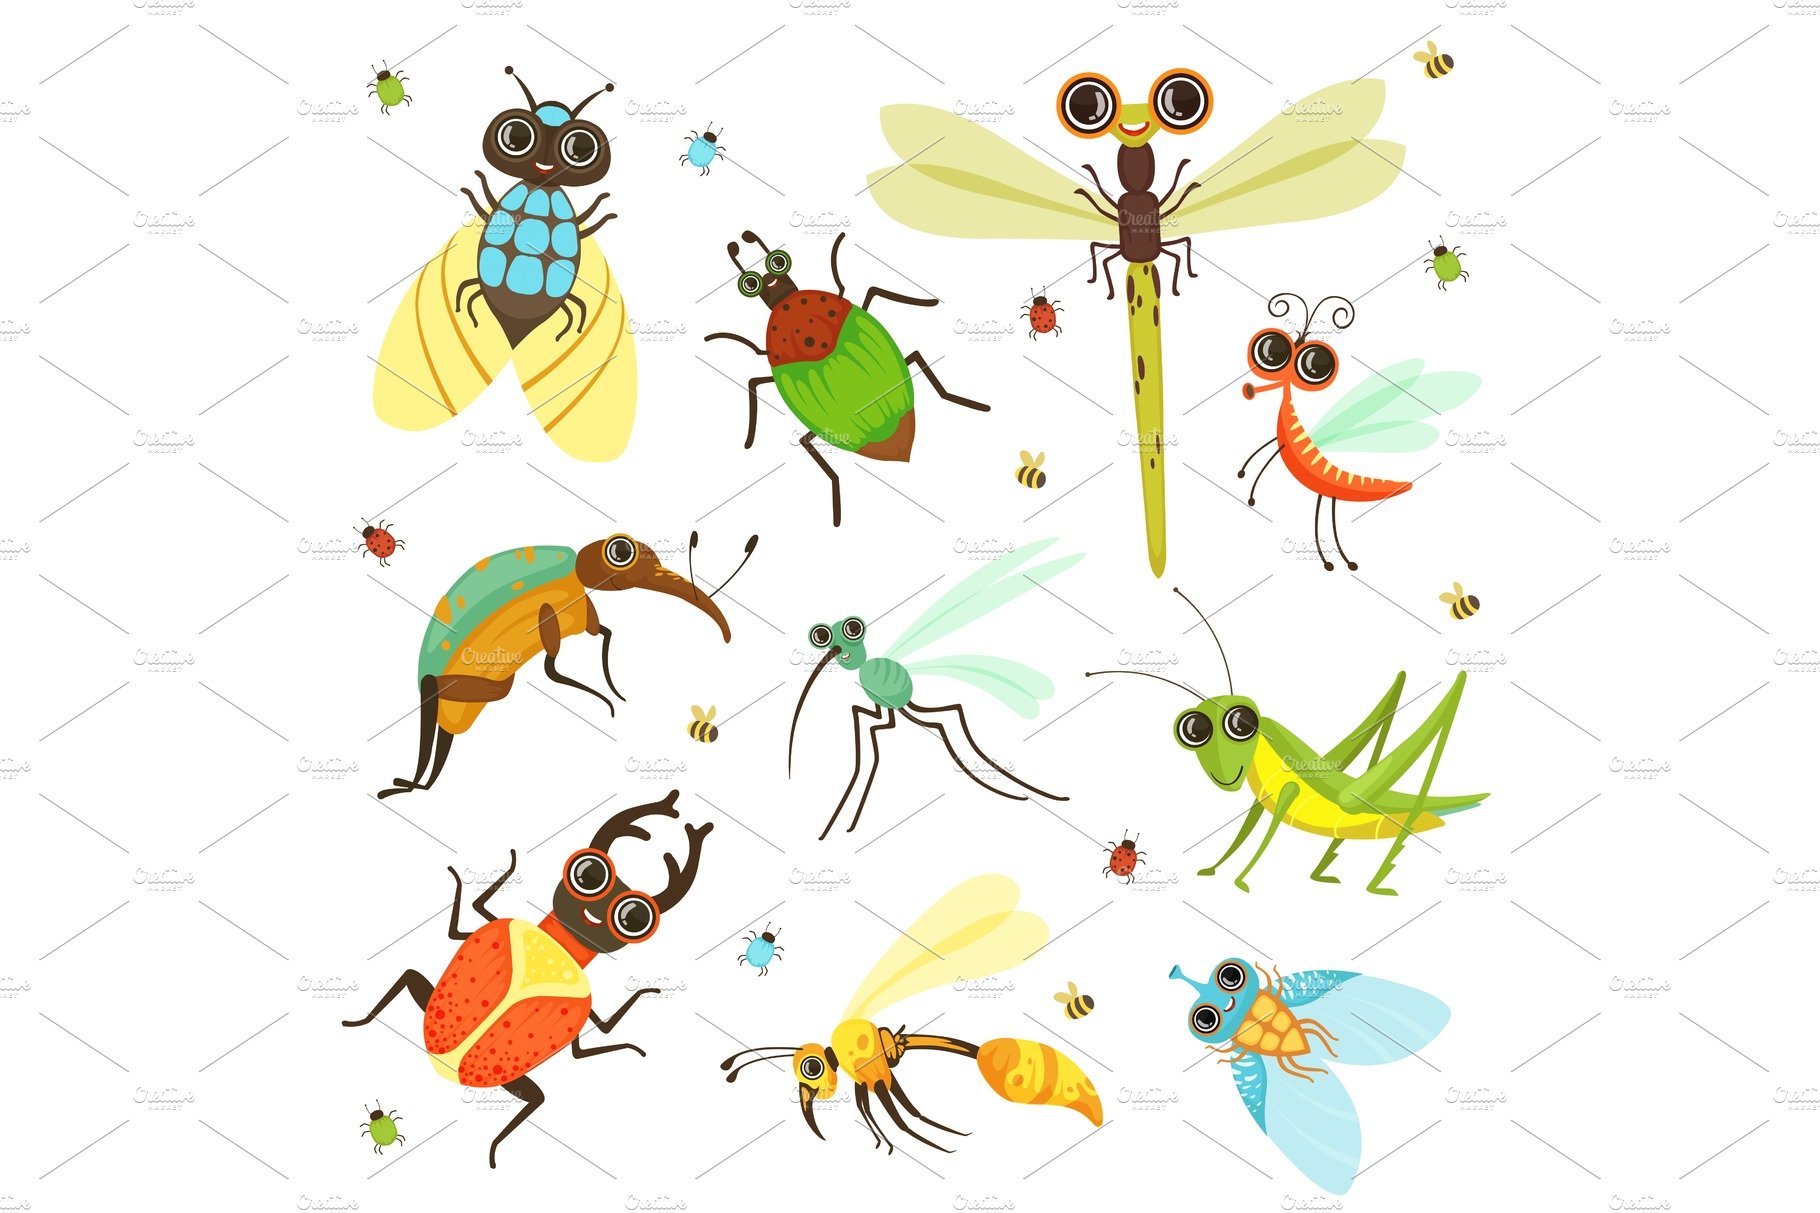 Bugs, butterfly and other insects in cartoon style cover image.